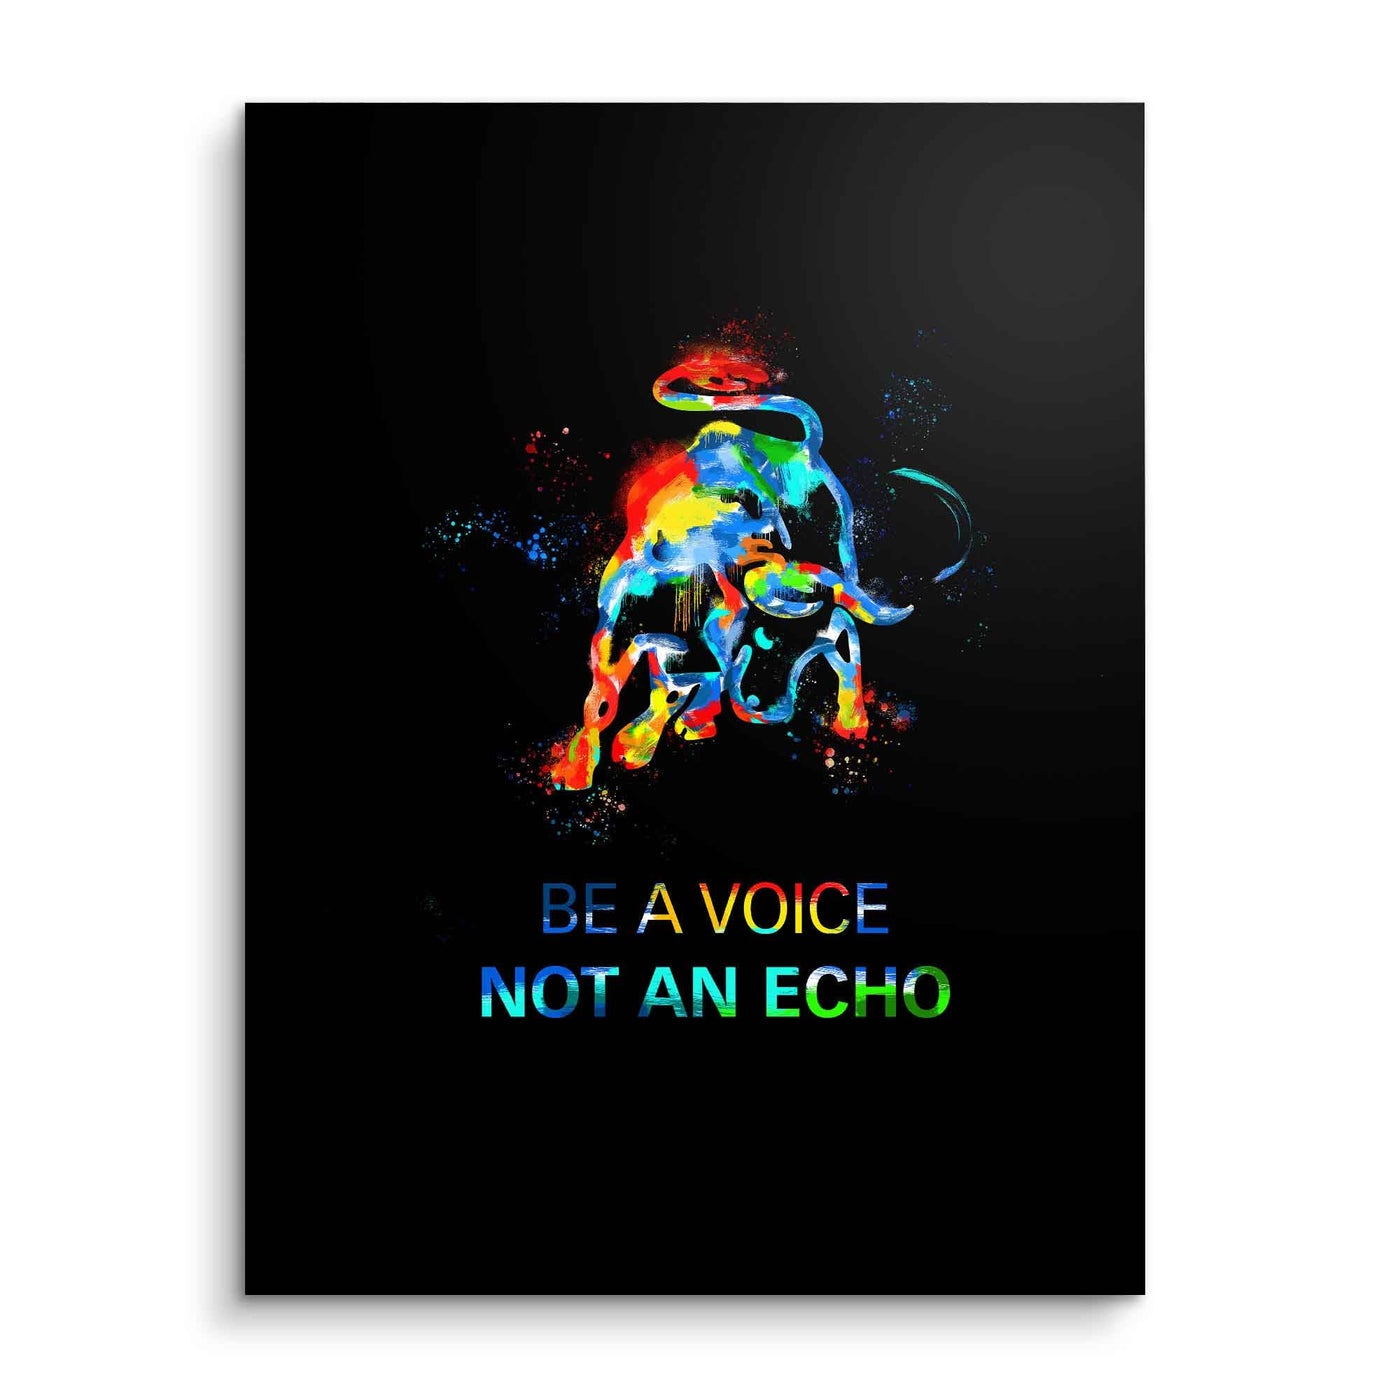 Be a voice - black edition